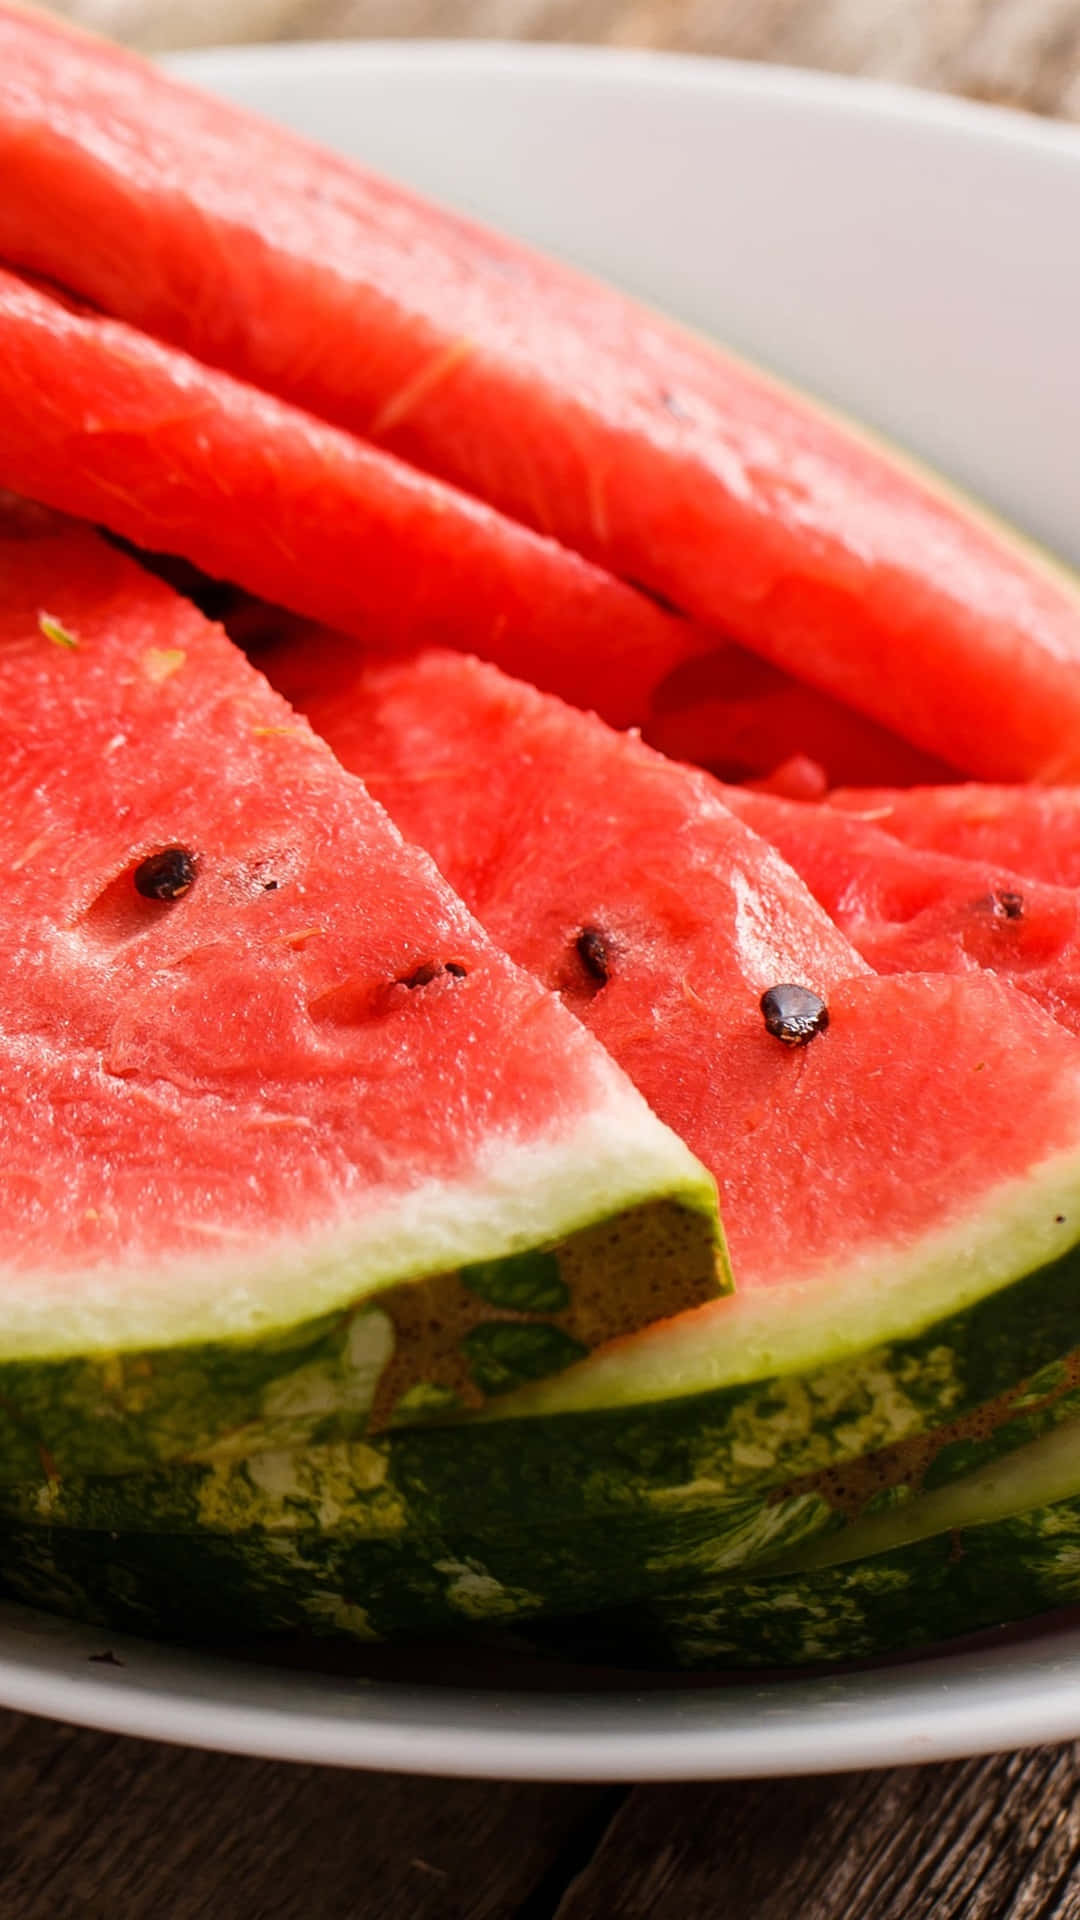 Cool and crunchy - enjoy a slice of watermelon with your iPhone. Wallpaper